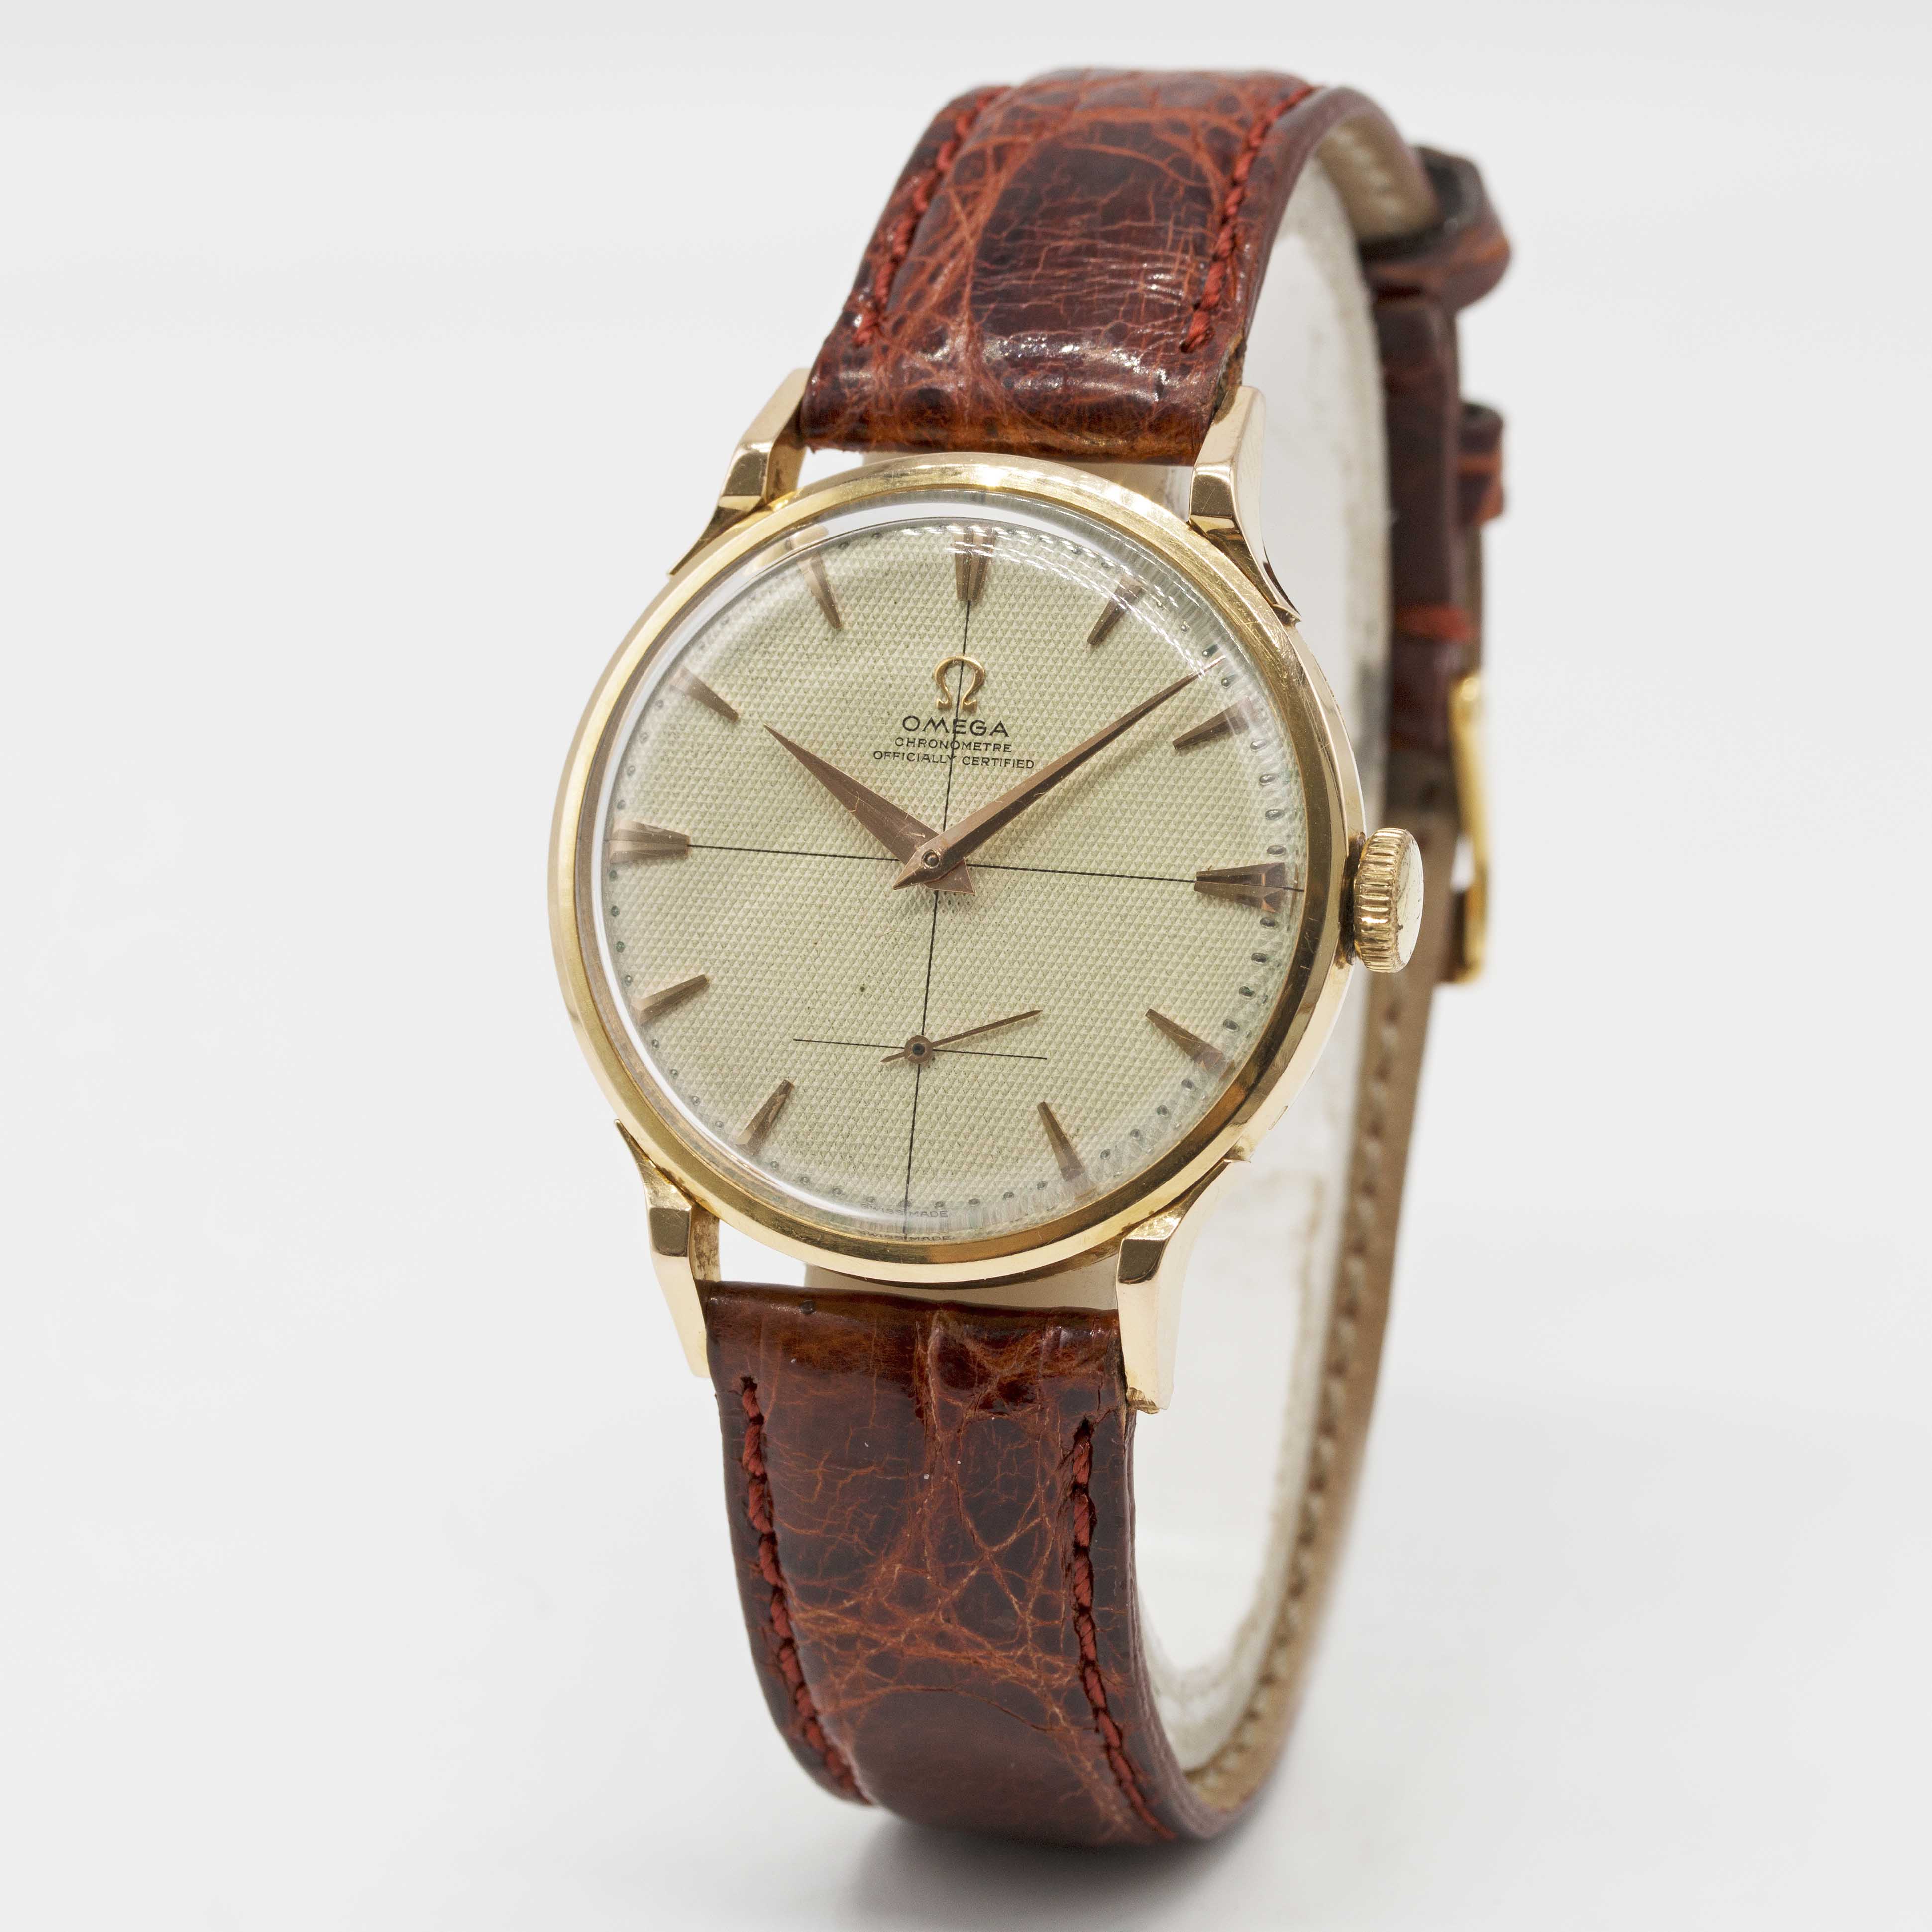 A RARE GENTLEMAN'S 18K SOLID ROSE GOLD OMEGA CHRONOMETRE OFFICIALLY CERTIFIED WRIST WATCH CIRCA - Image 5 of 10